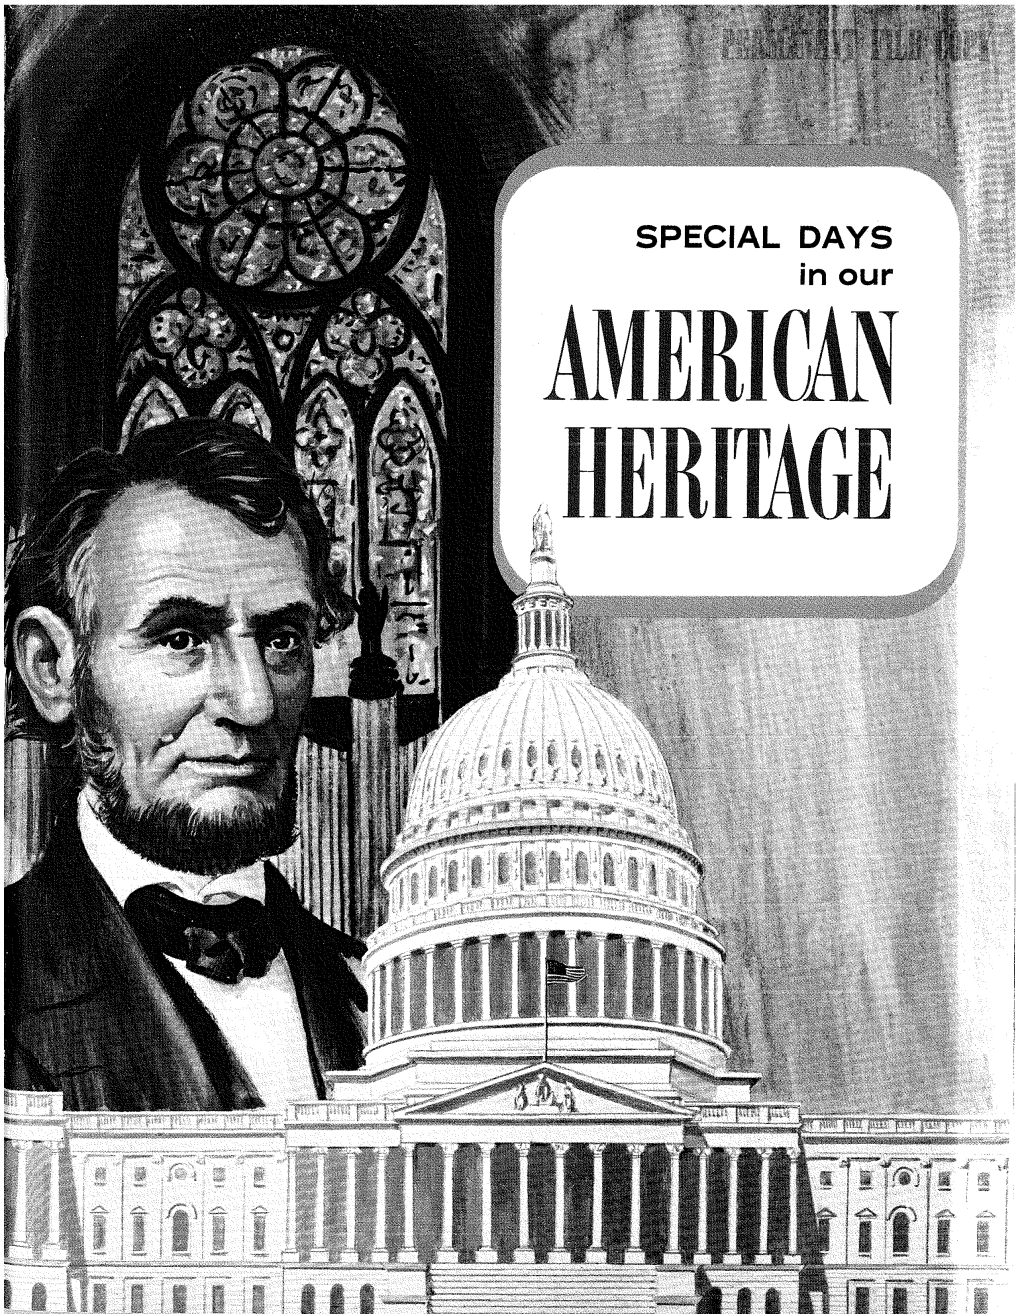 SPECIAL DAYS in Our ERICAN ,HERITAGE SPECIAL DAYS in Our AMERICAN HERI11\GE